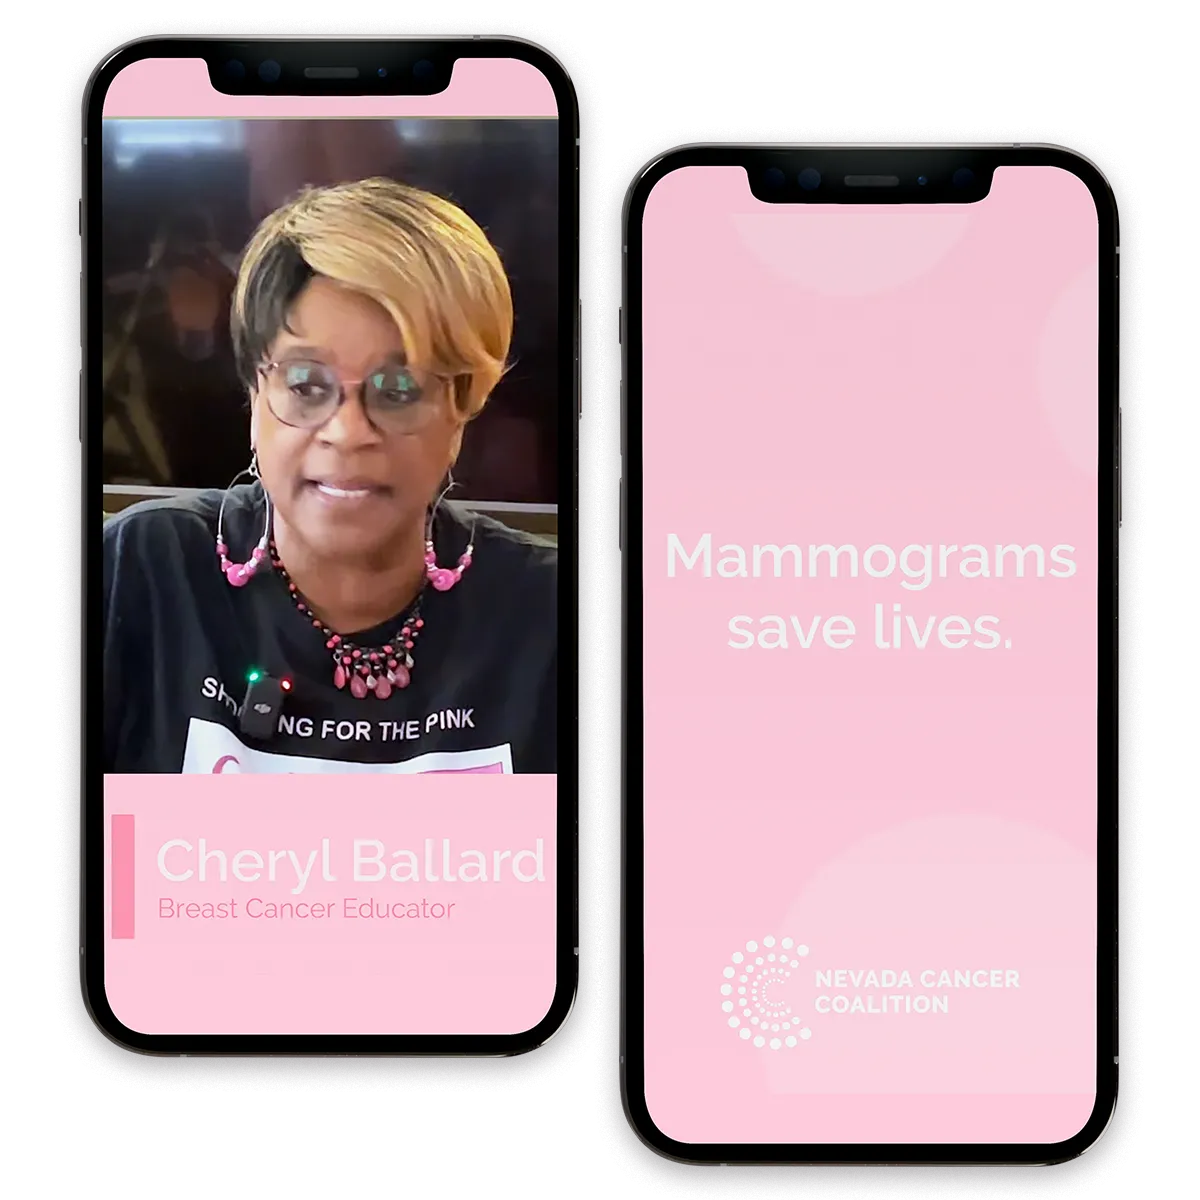 iphone showing screenshots from the breast cancer awareness campaign videos